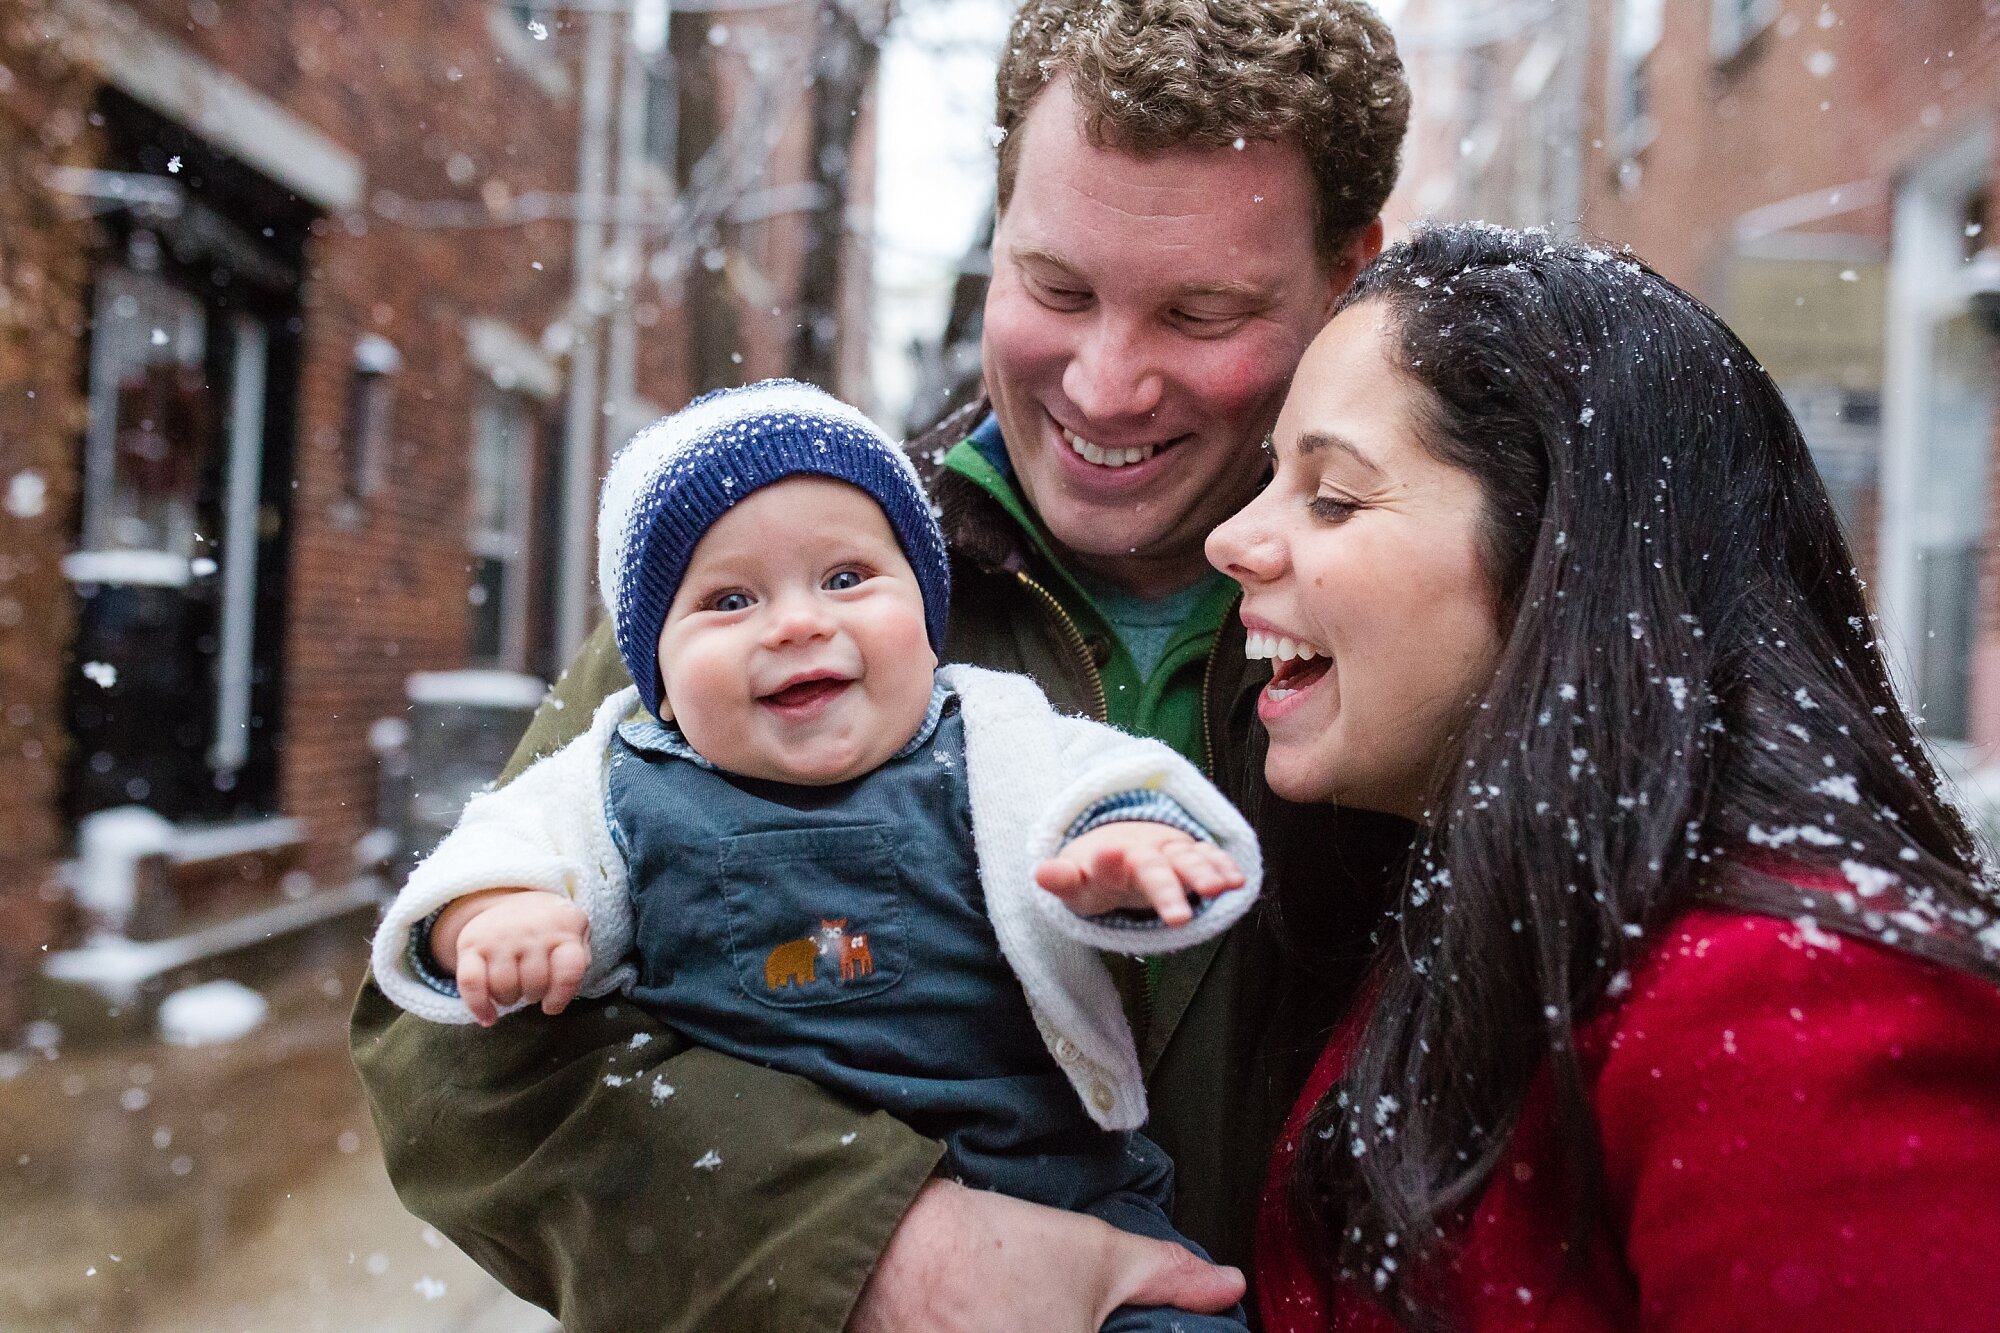 Family of three take 8 month old son outside to experience his first snow fall, baby laughs and smiles, mom wearing red coat, Philadelphia Family Photographer